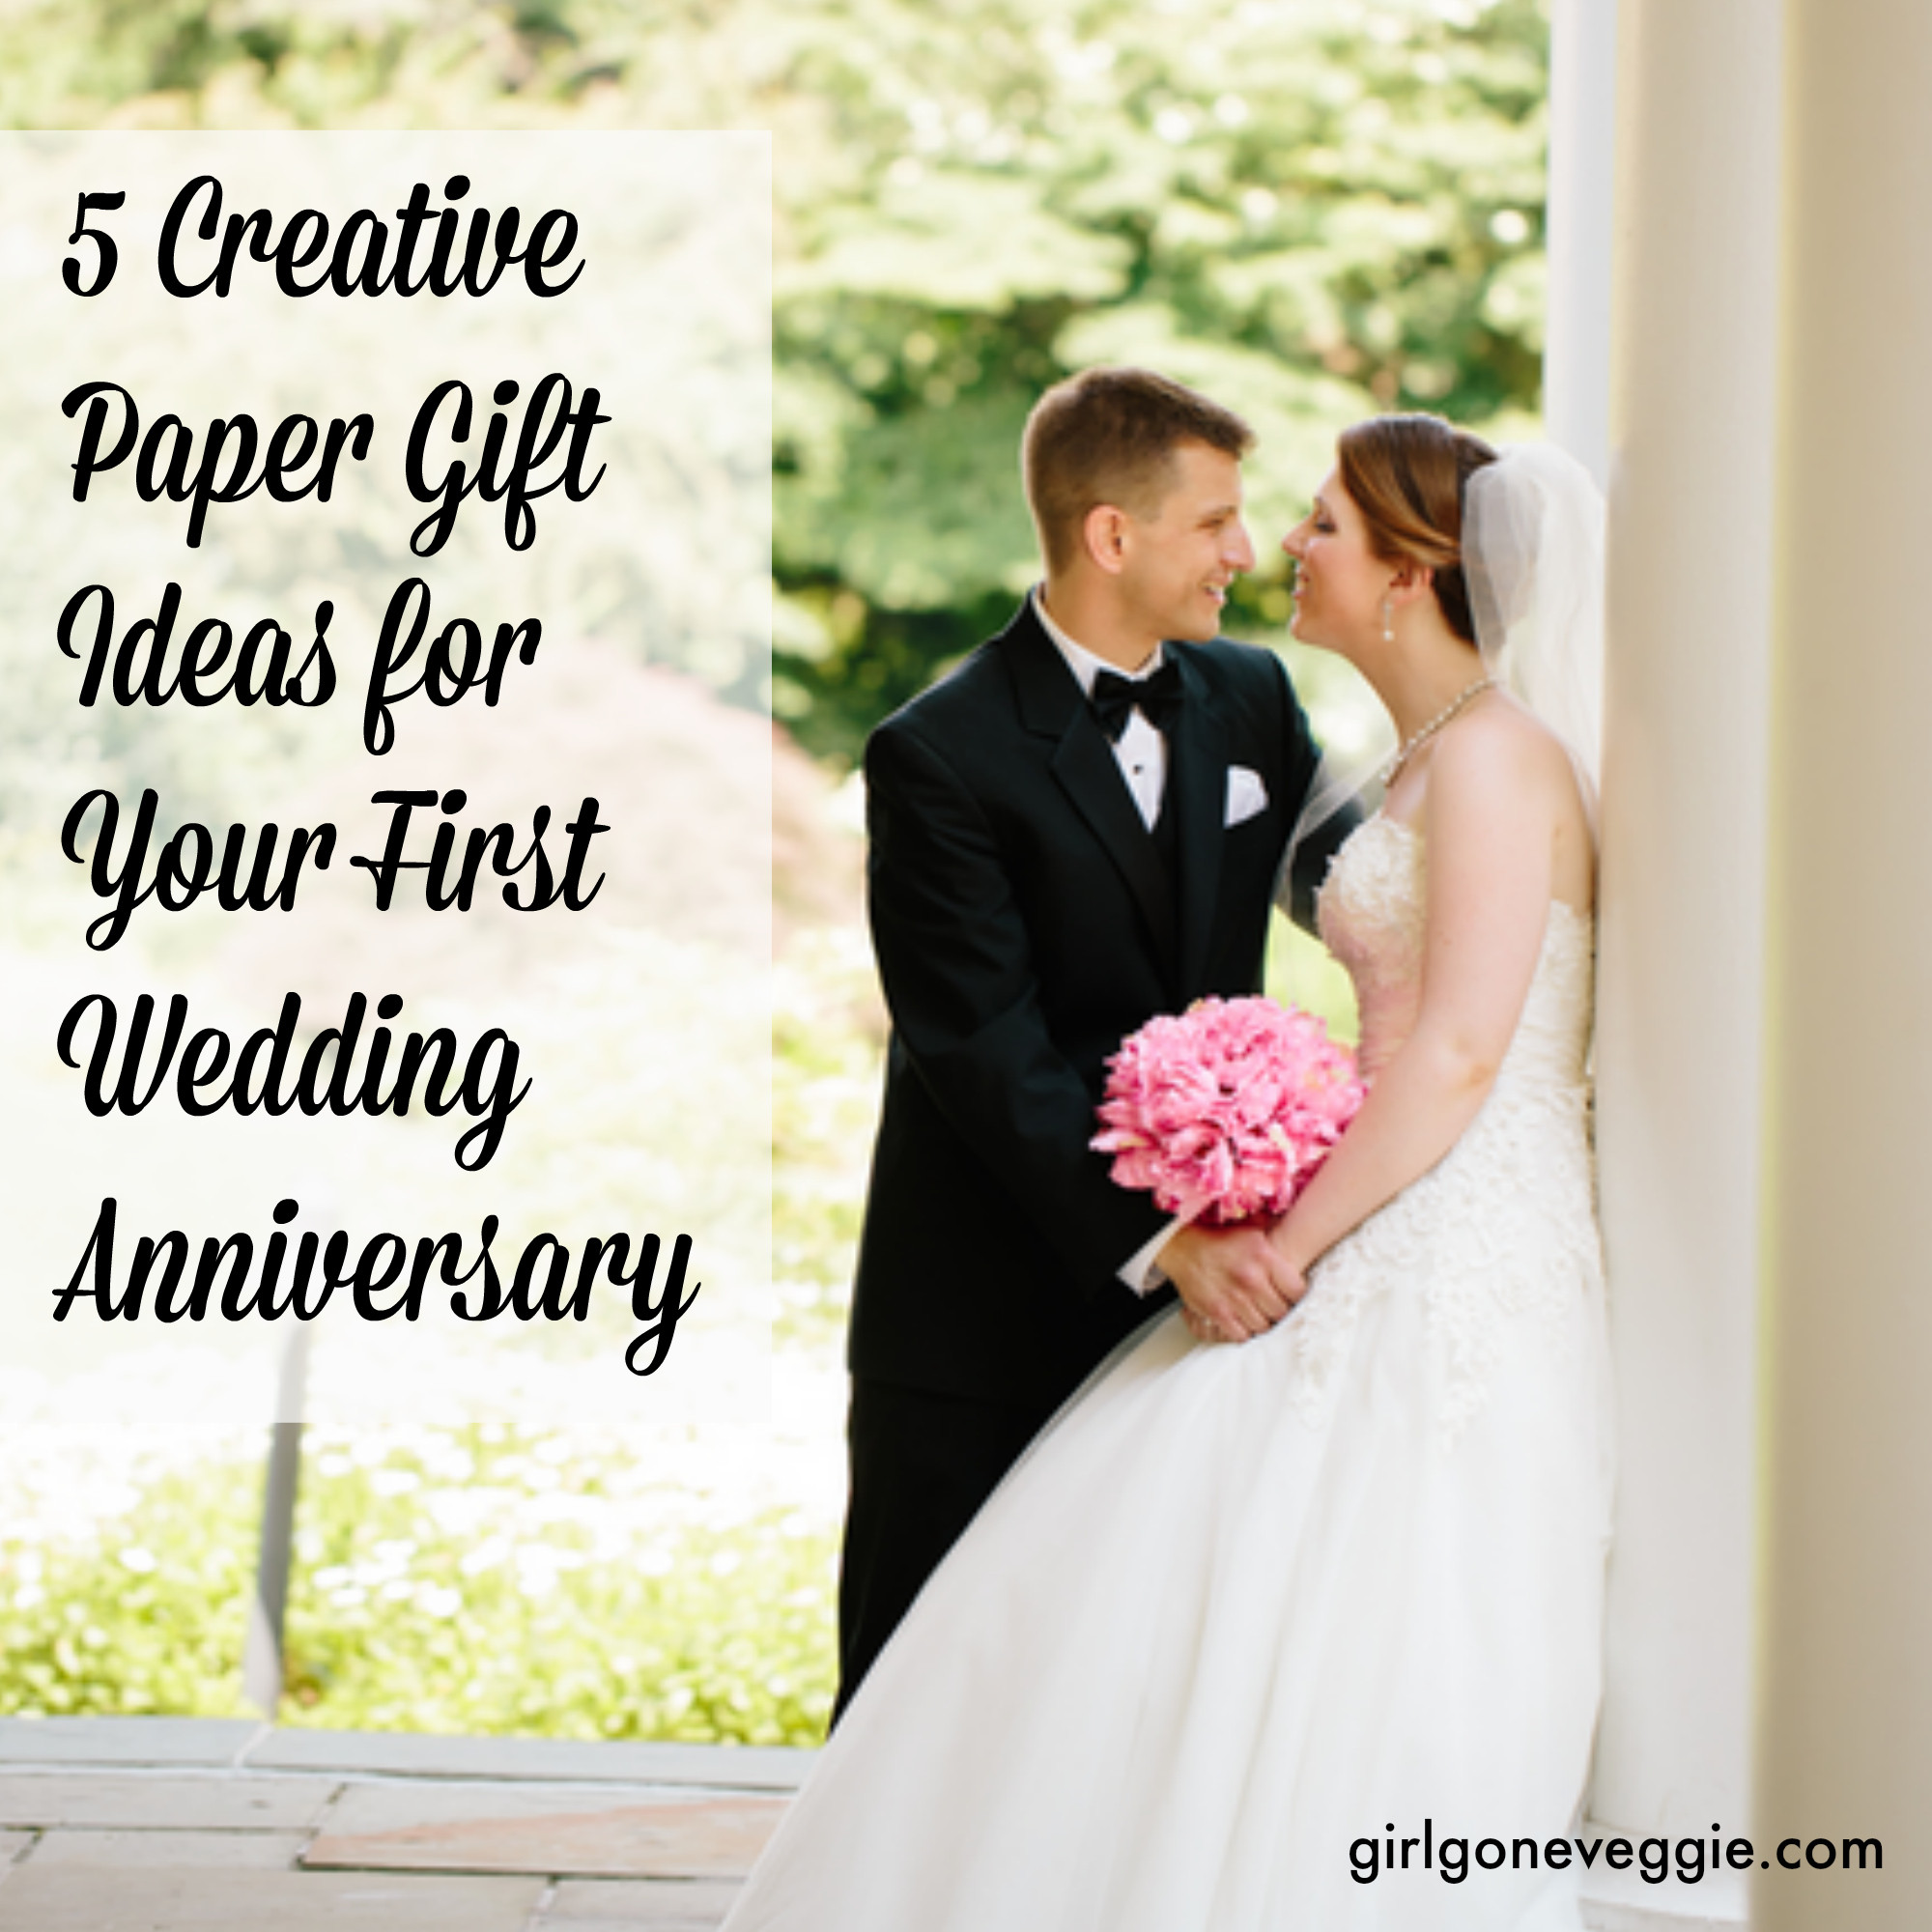 18 Year Wedding Anniversary Gift Ideas For Her
 5 Creative Paper Gift Ideas for Your 1st Wedding Anniversary